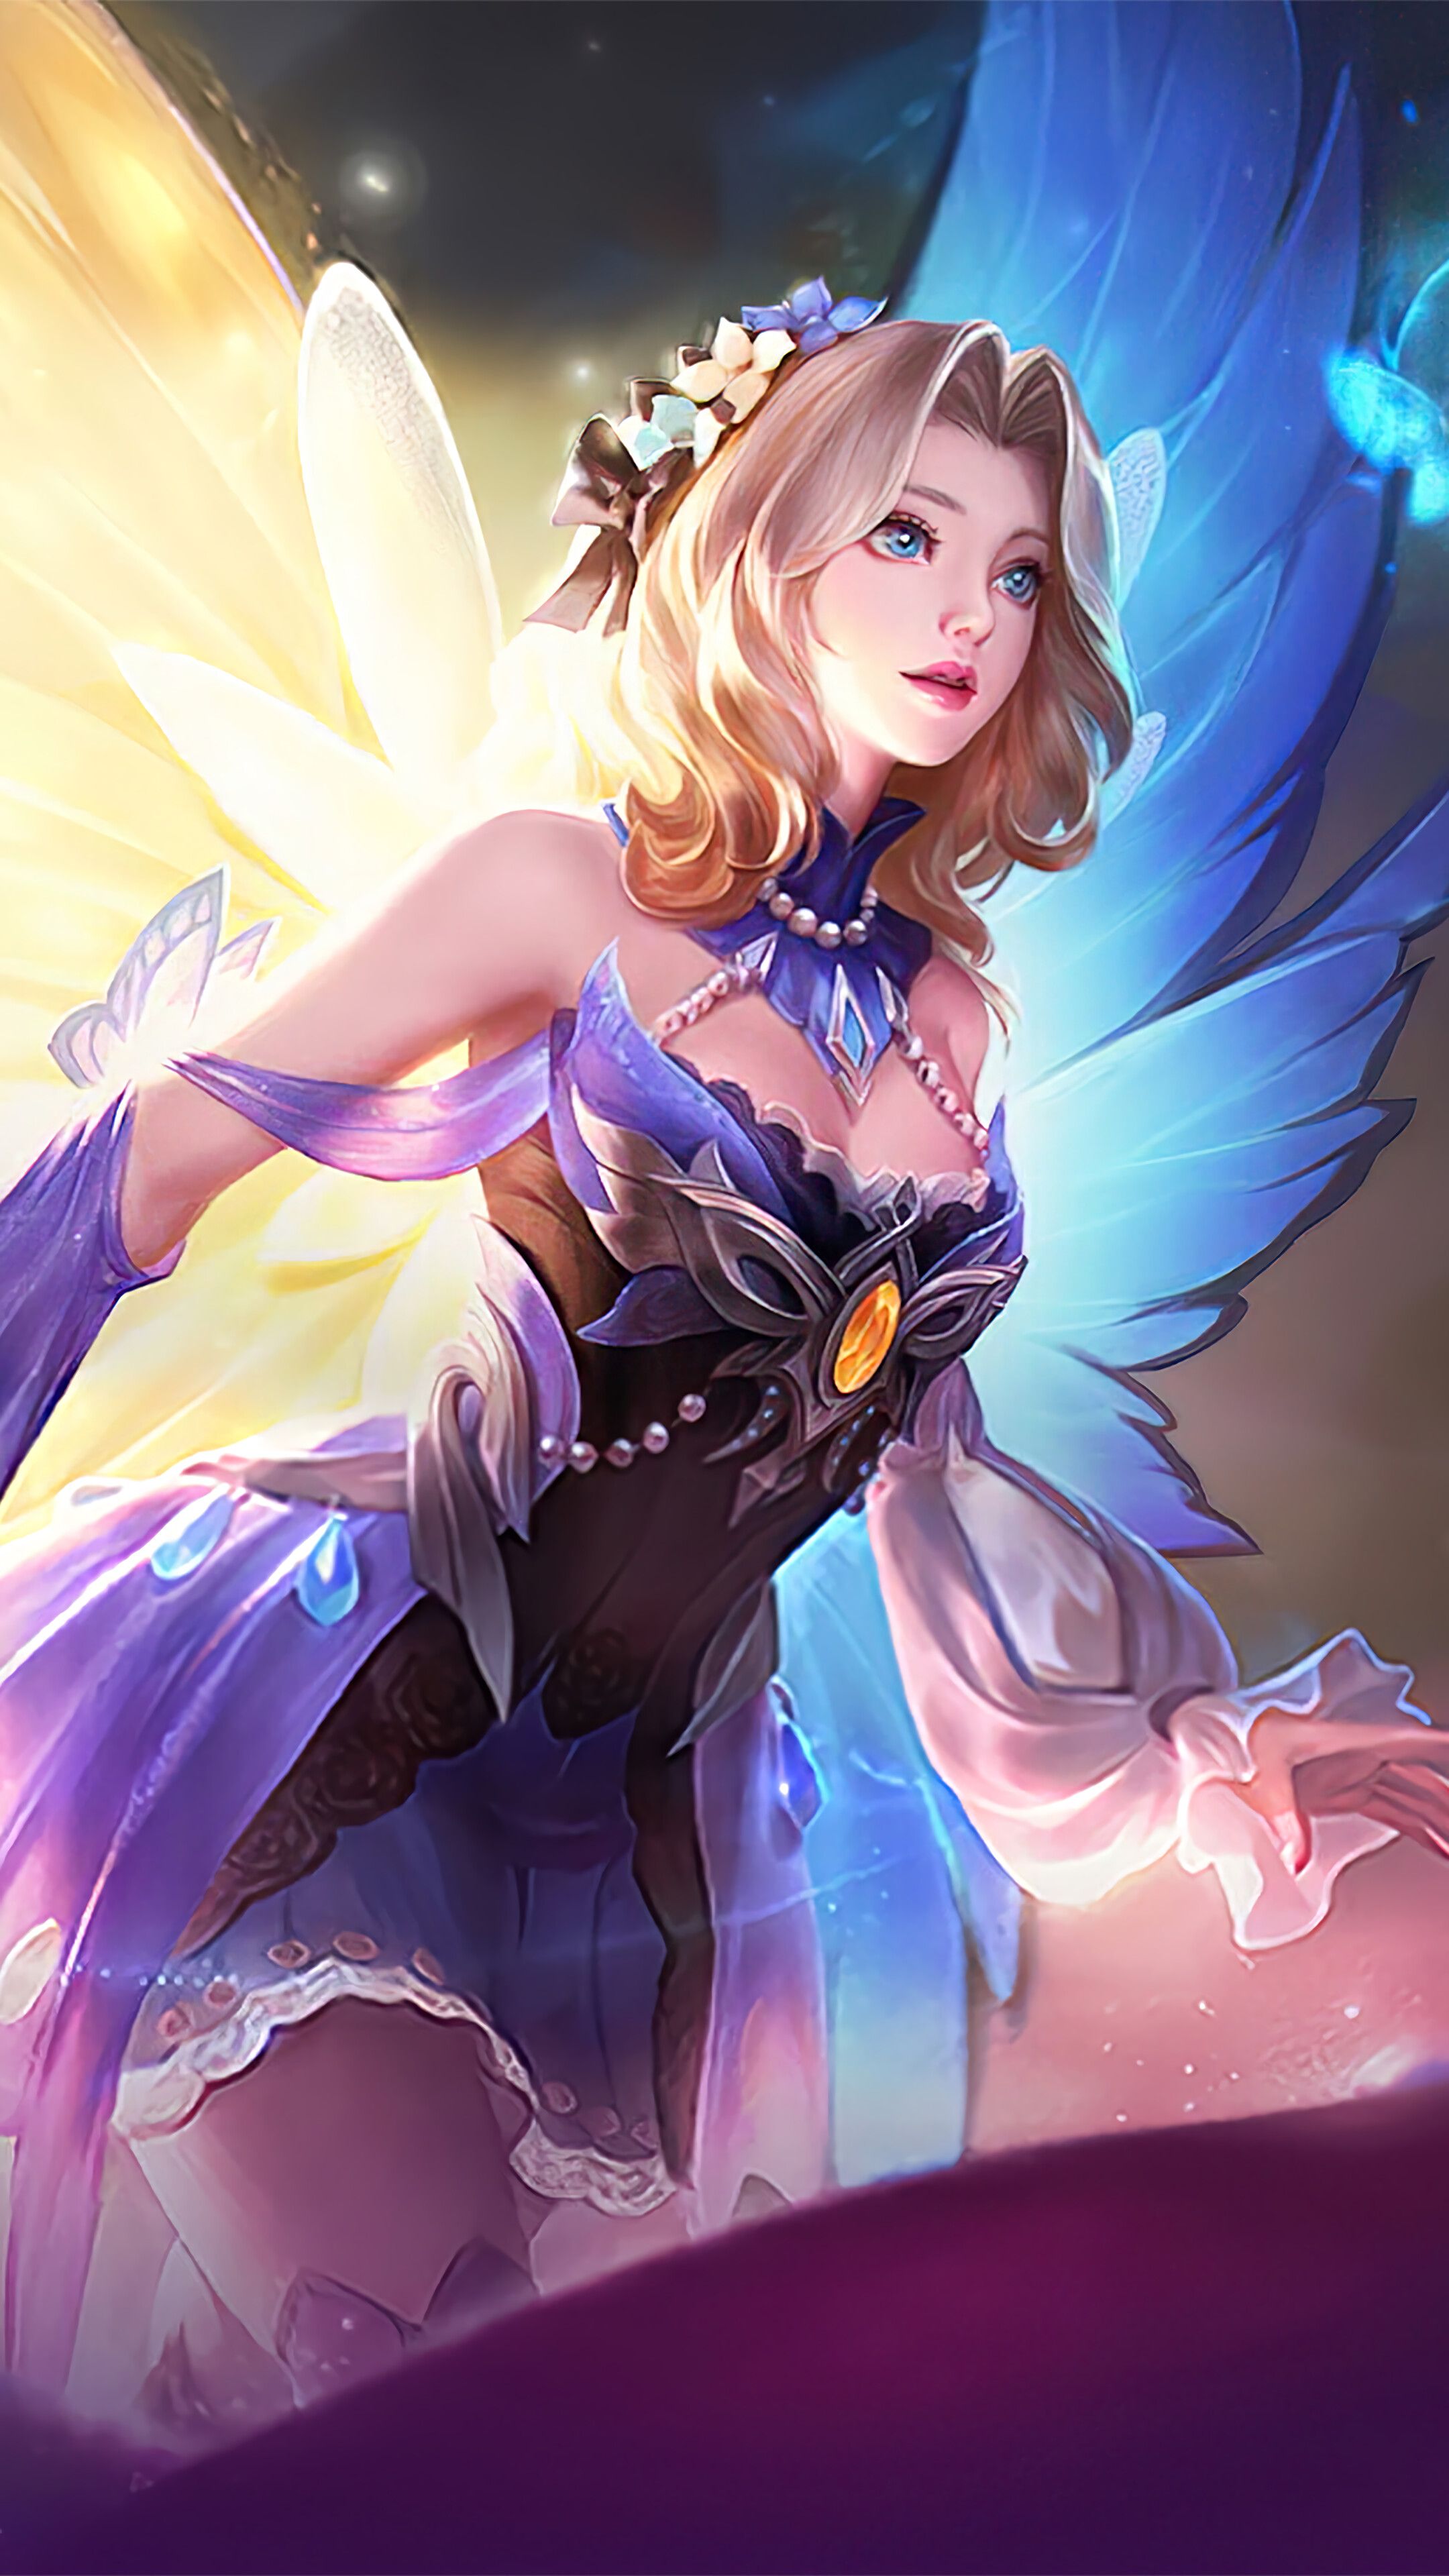 Lunox, Butterfly Seraphim, Skin, Mobile Legends, 4K phone HD Wallpaper, Image, Background, Photo and Picture HD Wallpaper